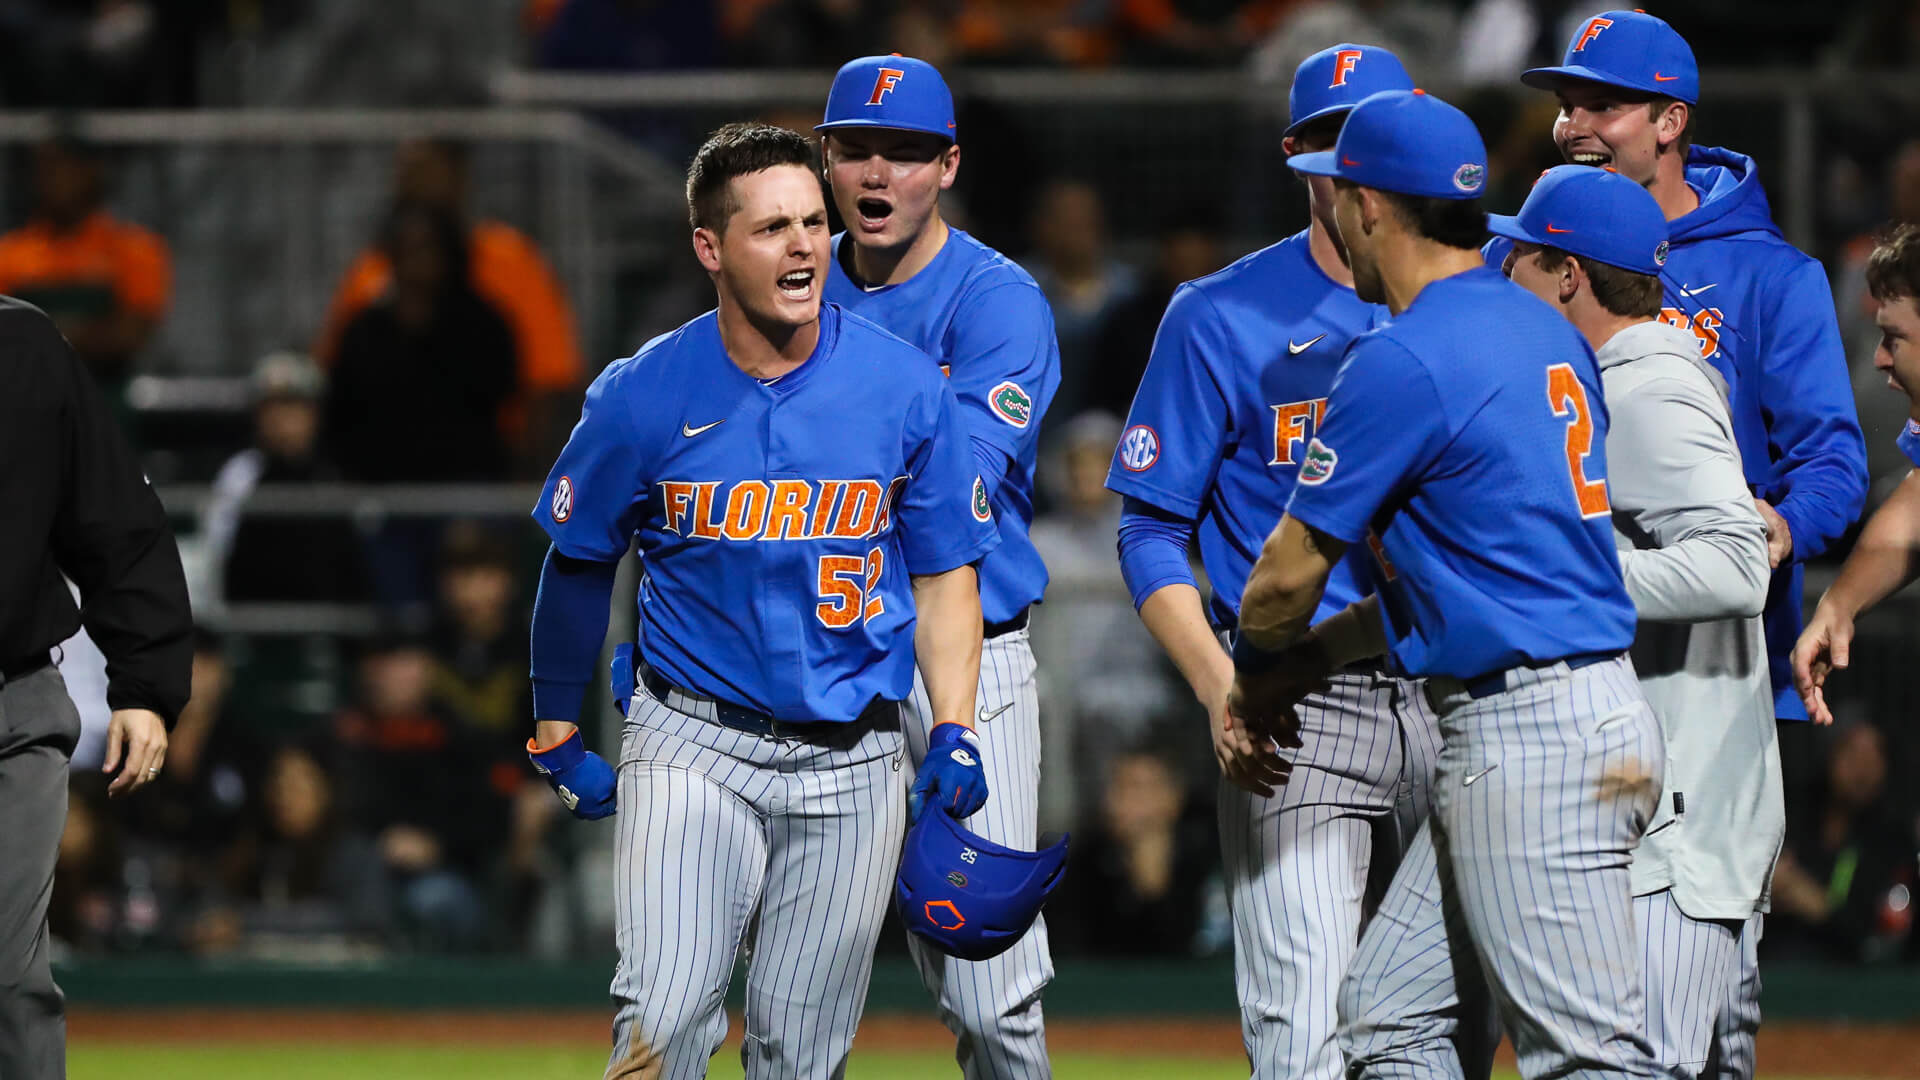 Gator baseball makes thunderous statement in sweep of Miami - In All Kinds Of Weather